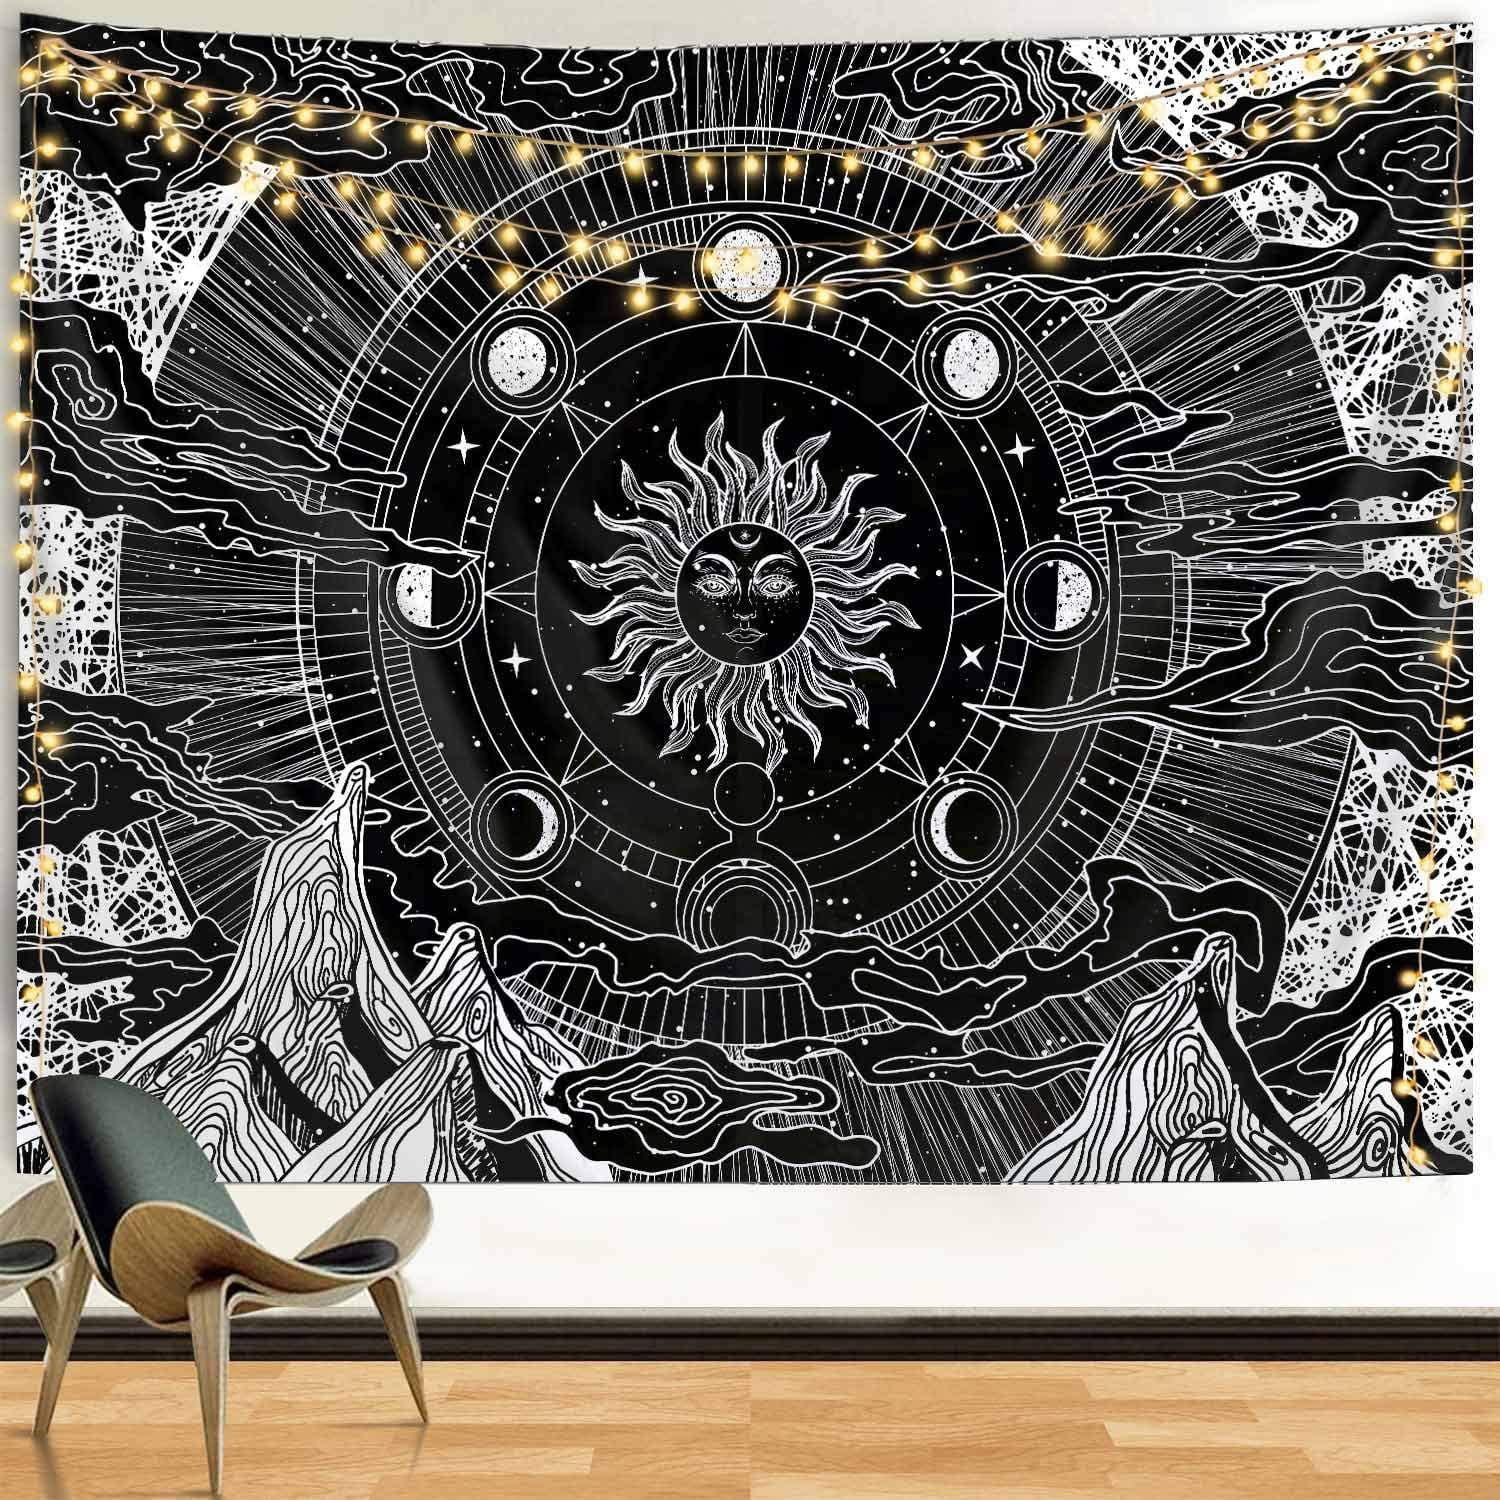 Funeon 36x48inch Small Black and White Tapestry for Bedroom Aesthetic Sun and Moon Zodiac Tapestry Wall Hanging Astrology Witchy Tapestries Indie Room Decor Teen Girl Dorm College Gothic Tapestry